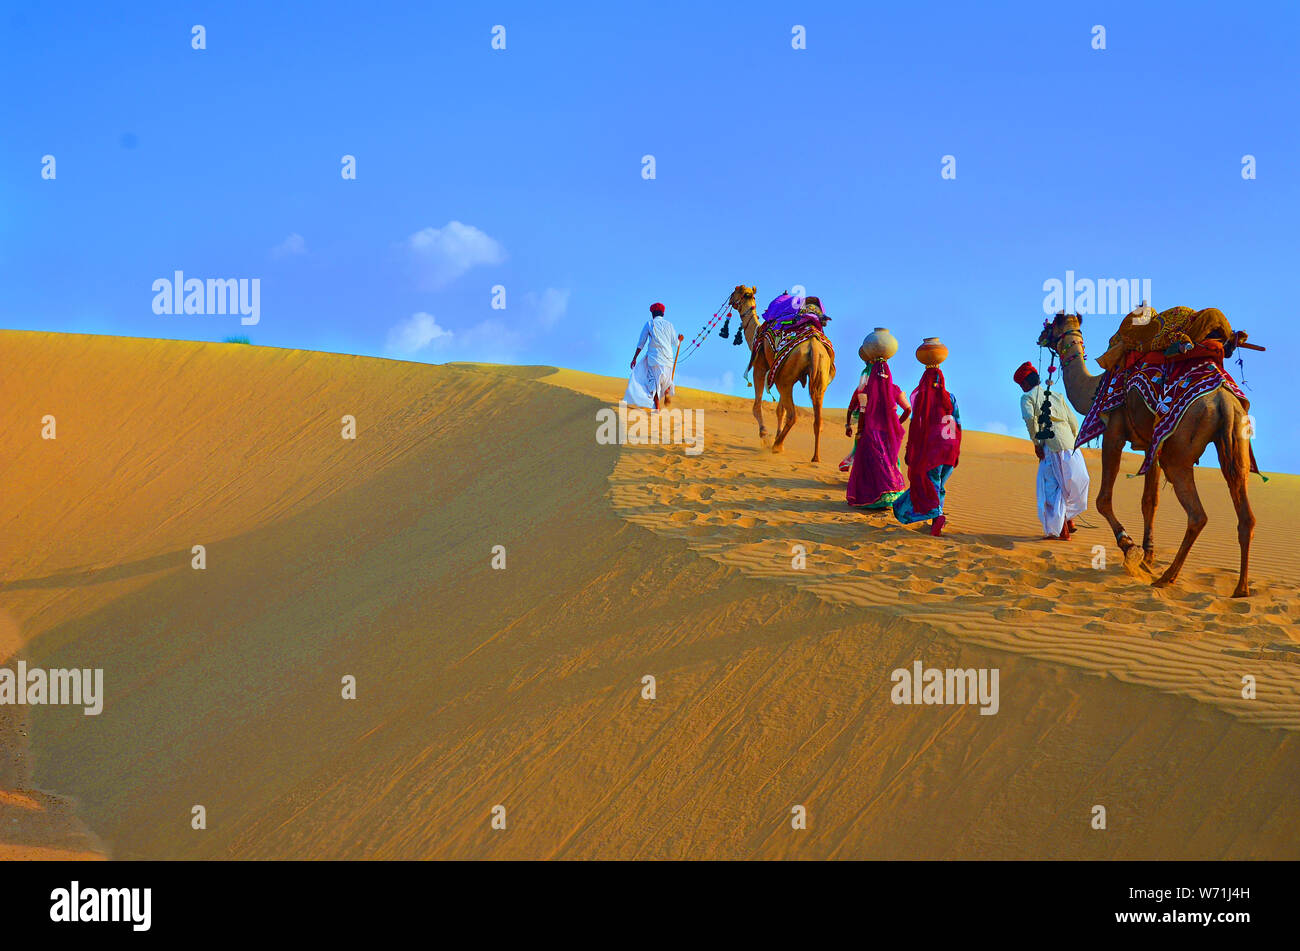 Two cameleers and women with camels walking on sand dunes of thar desert against blue sky , Jaisalmer, Rajasthan, India Stock Photo